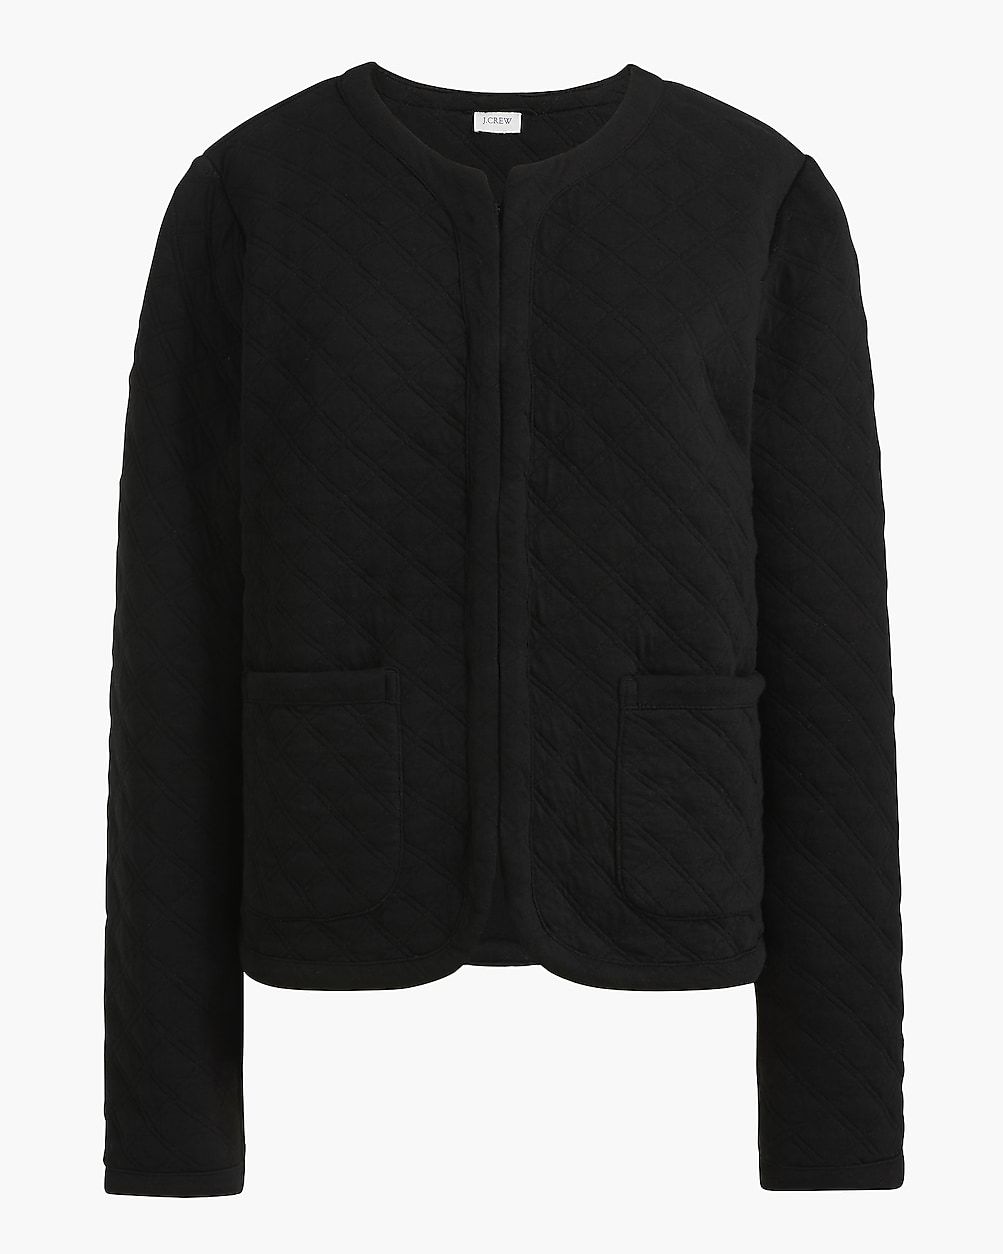 Quilted jacket | J.Crew Factory